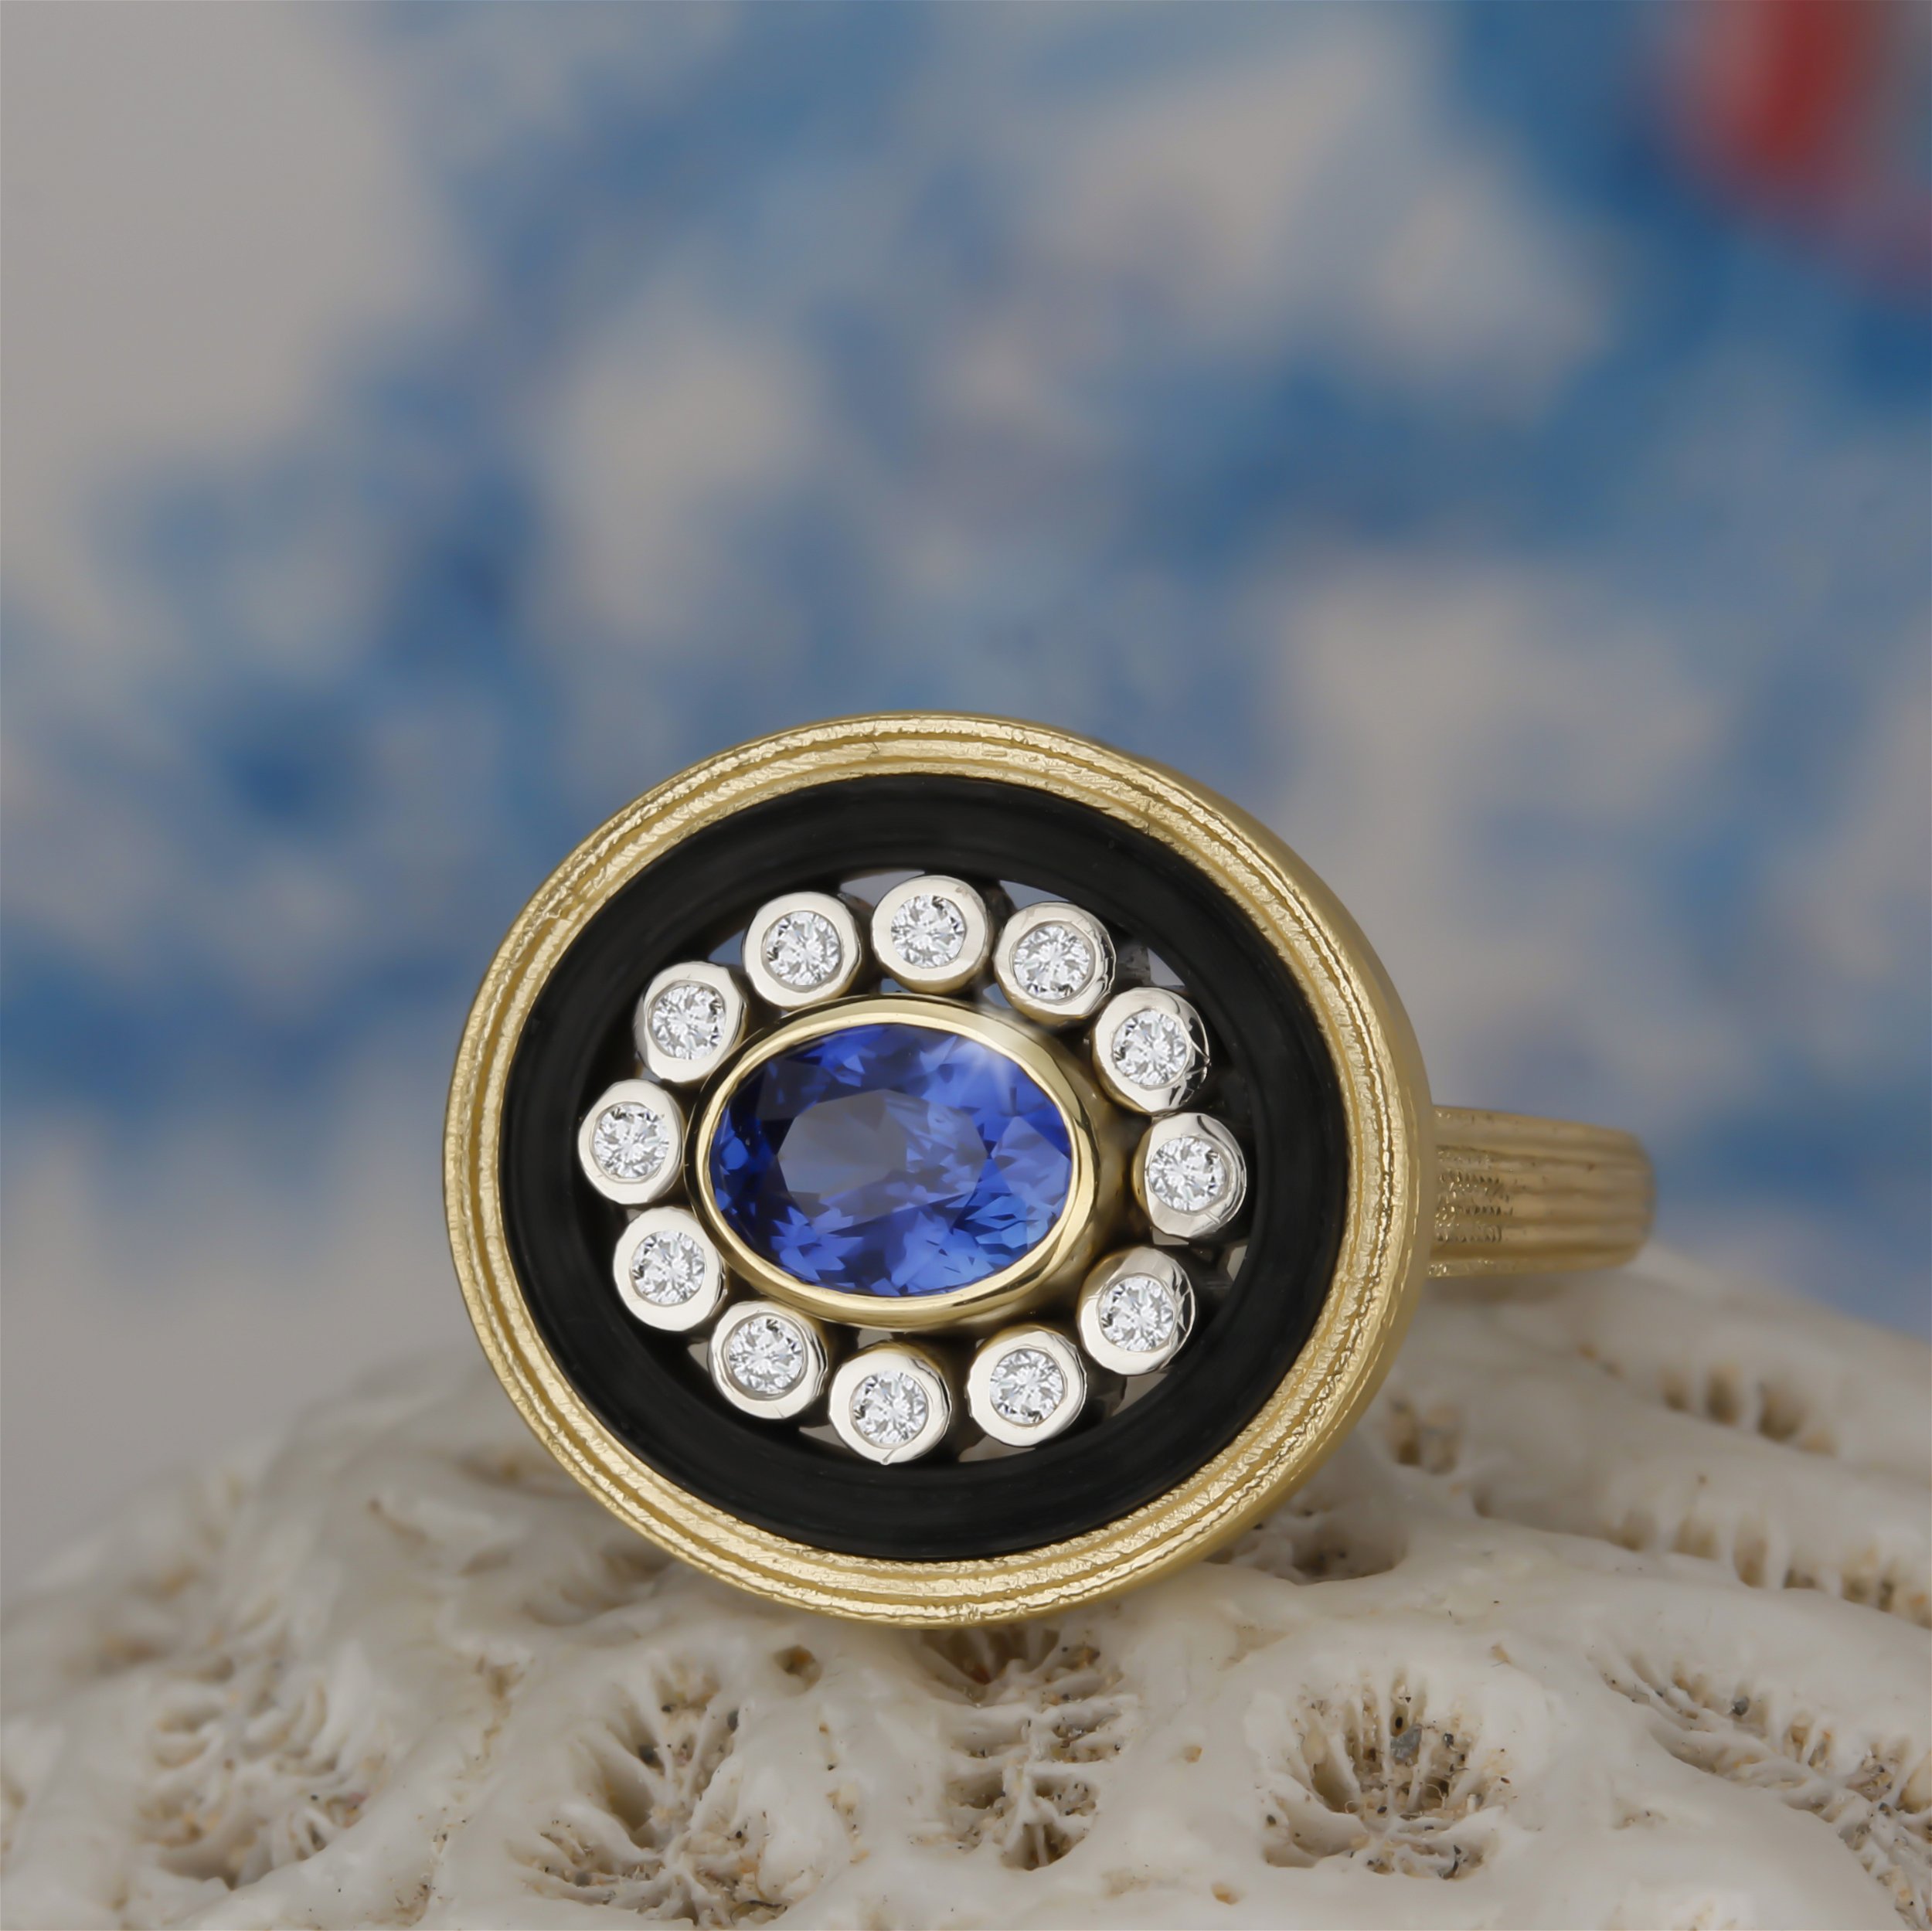 Paragon Oval Center Stone Ring with Sapphire and Diamonds in 18kt Yellow Gold and Black Chrome